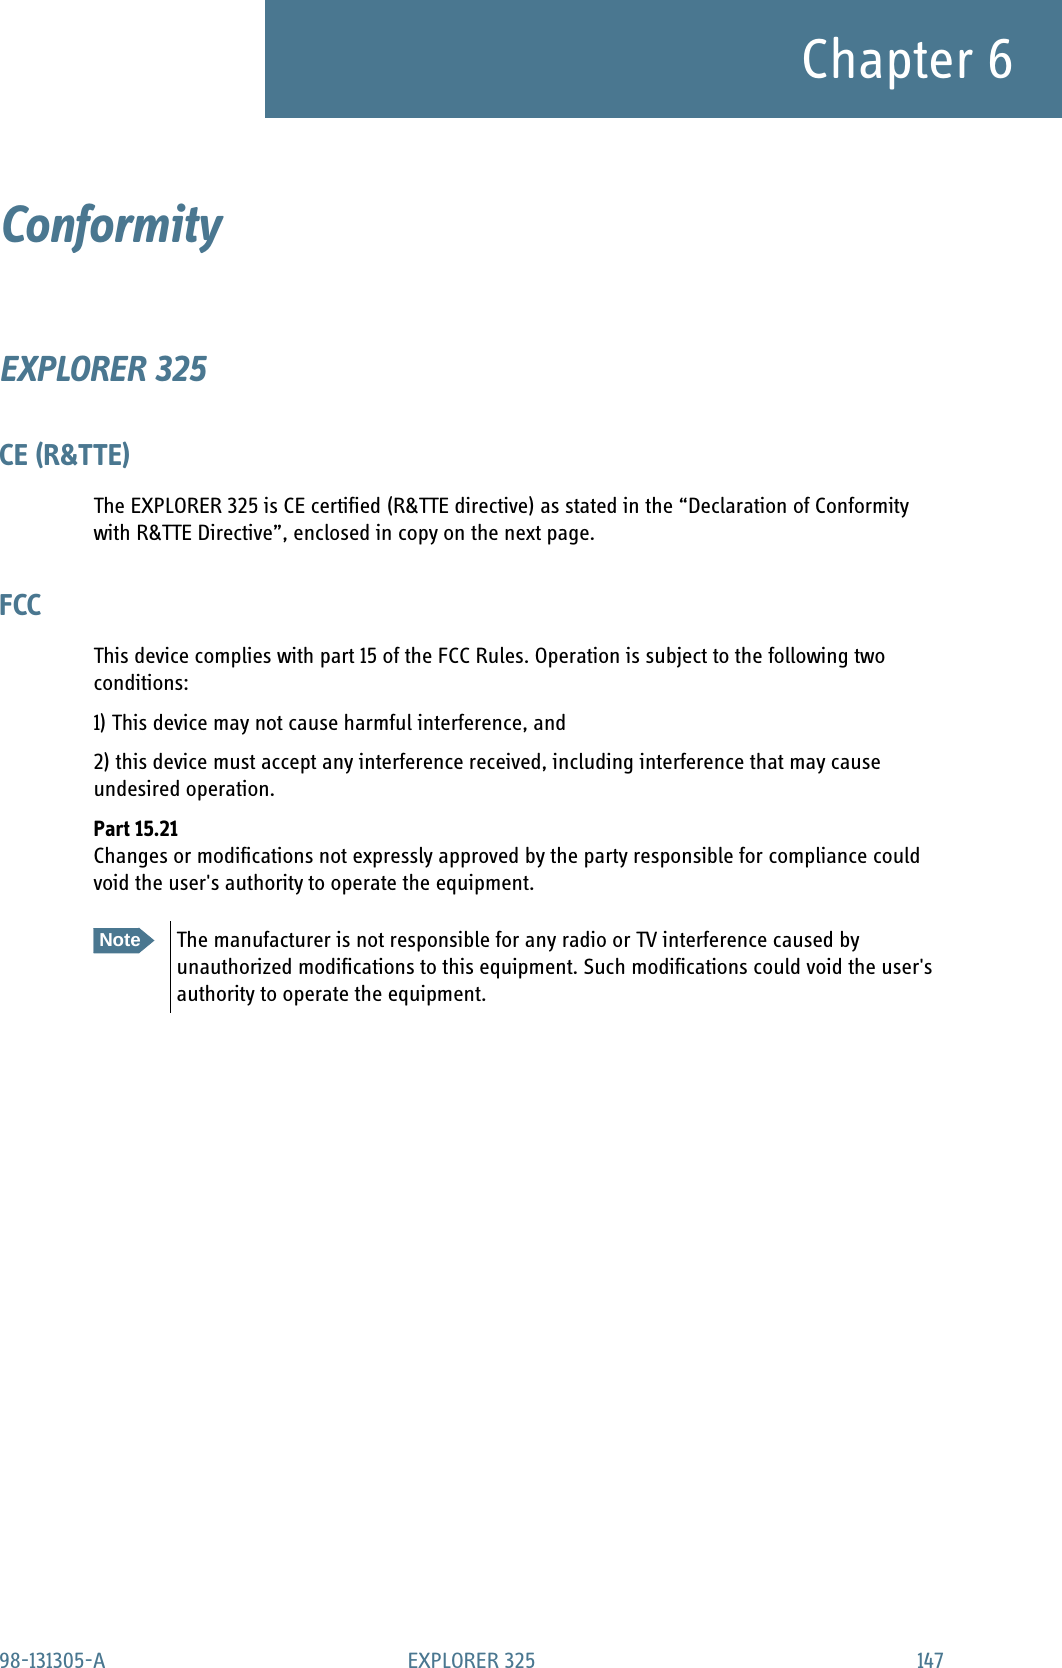 98-131305-A EXPLORER 325 147Chapter 6Conformity 6EXPLORER 325CE (R&amp;TTE)The EXPLORER 325 is CE certified (R&amp;TTE directive) as stated in the “Declaration of Conformity with R&amp;TTE Directive”, enclosed in copy on the next page.FCCThis device complies with part 15 of the FCC Rules. Operation is subject to the following two conditions:1) This device may not cause harmful interference, and 2) this device must accept any interference received, including interference that may cause undesired operation.Part 15.21Changes or modifications not expressly approved by the party responsible for compliance could void the user&apos;s authority to operate the equipment. NoteThe manufacturer is not responsible for any radio or TV interference caused by unauthorized modifications to this equipment. Such modifications could void the user&apos;s authority to operate the equipment.